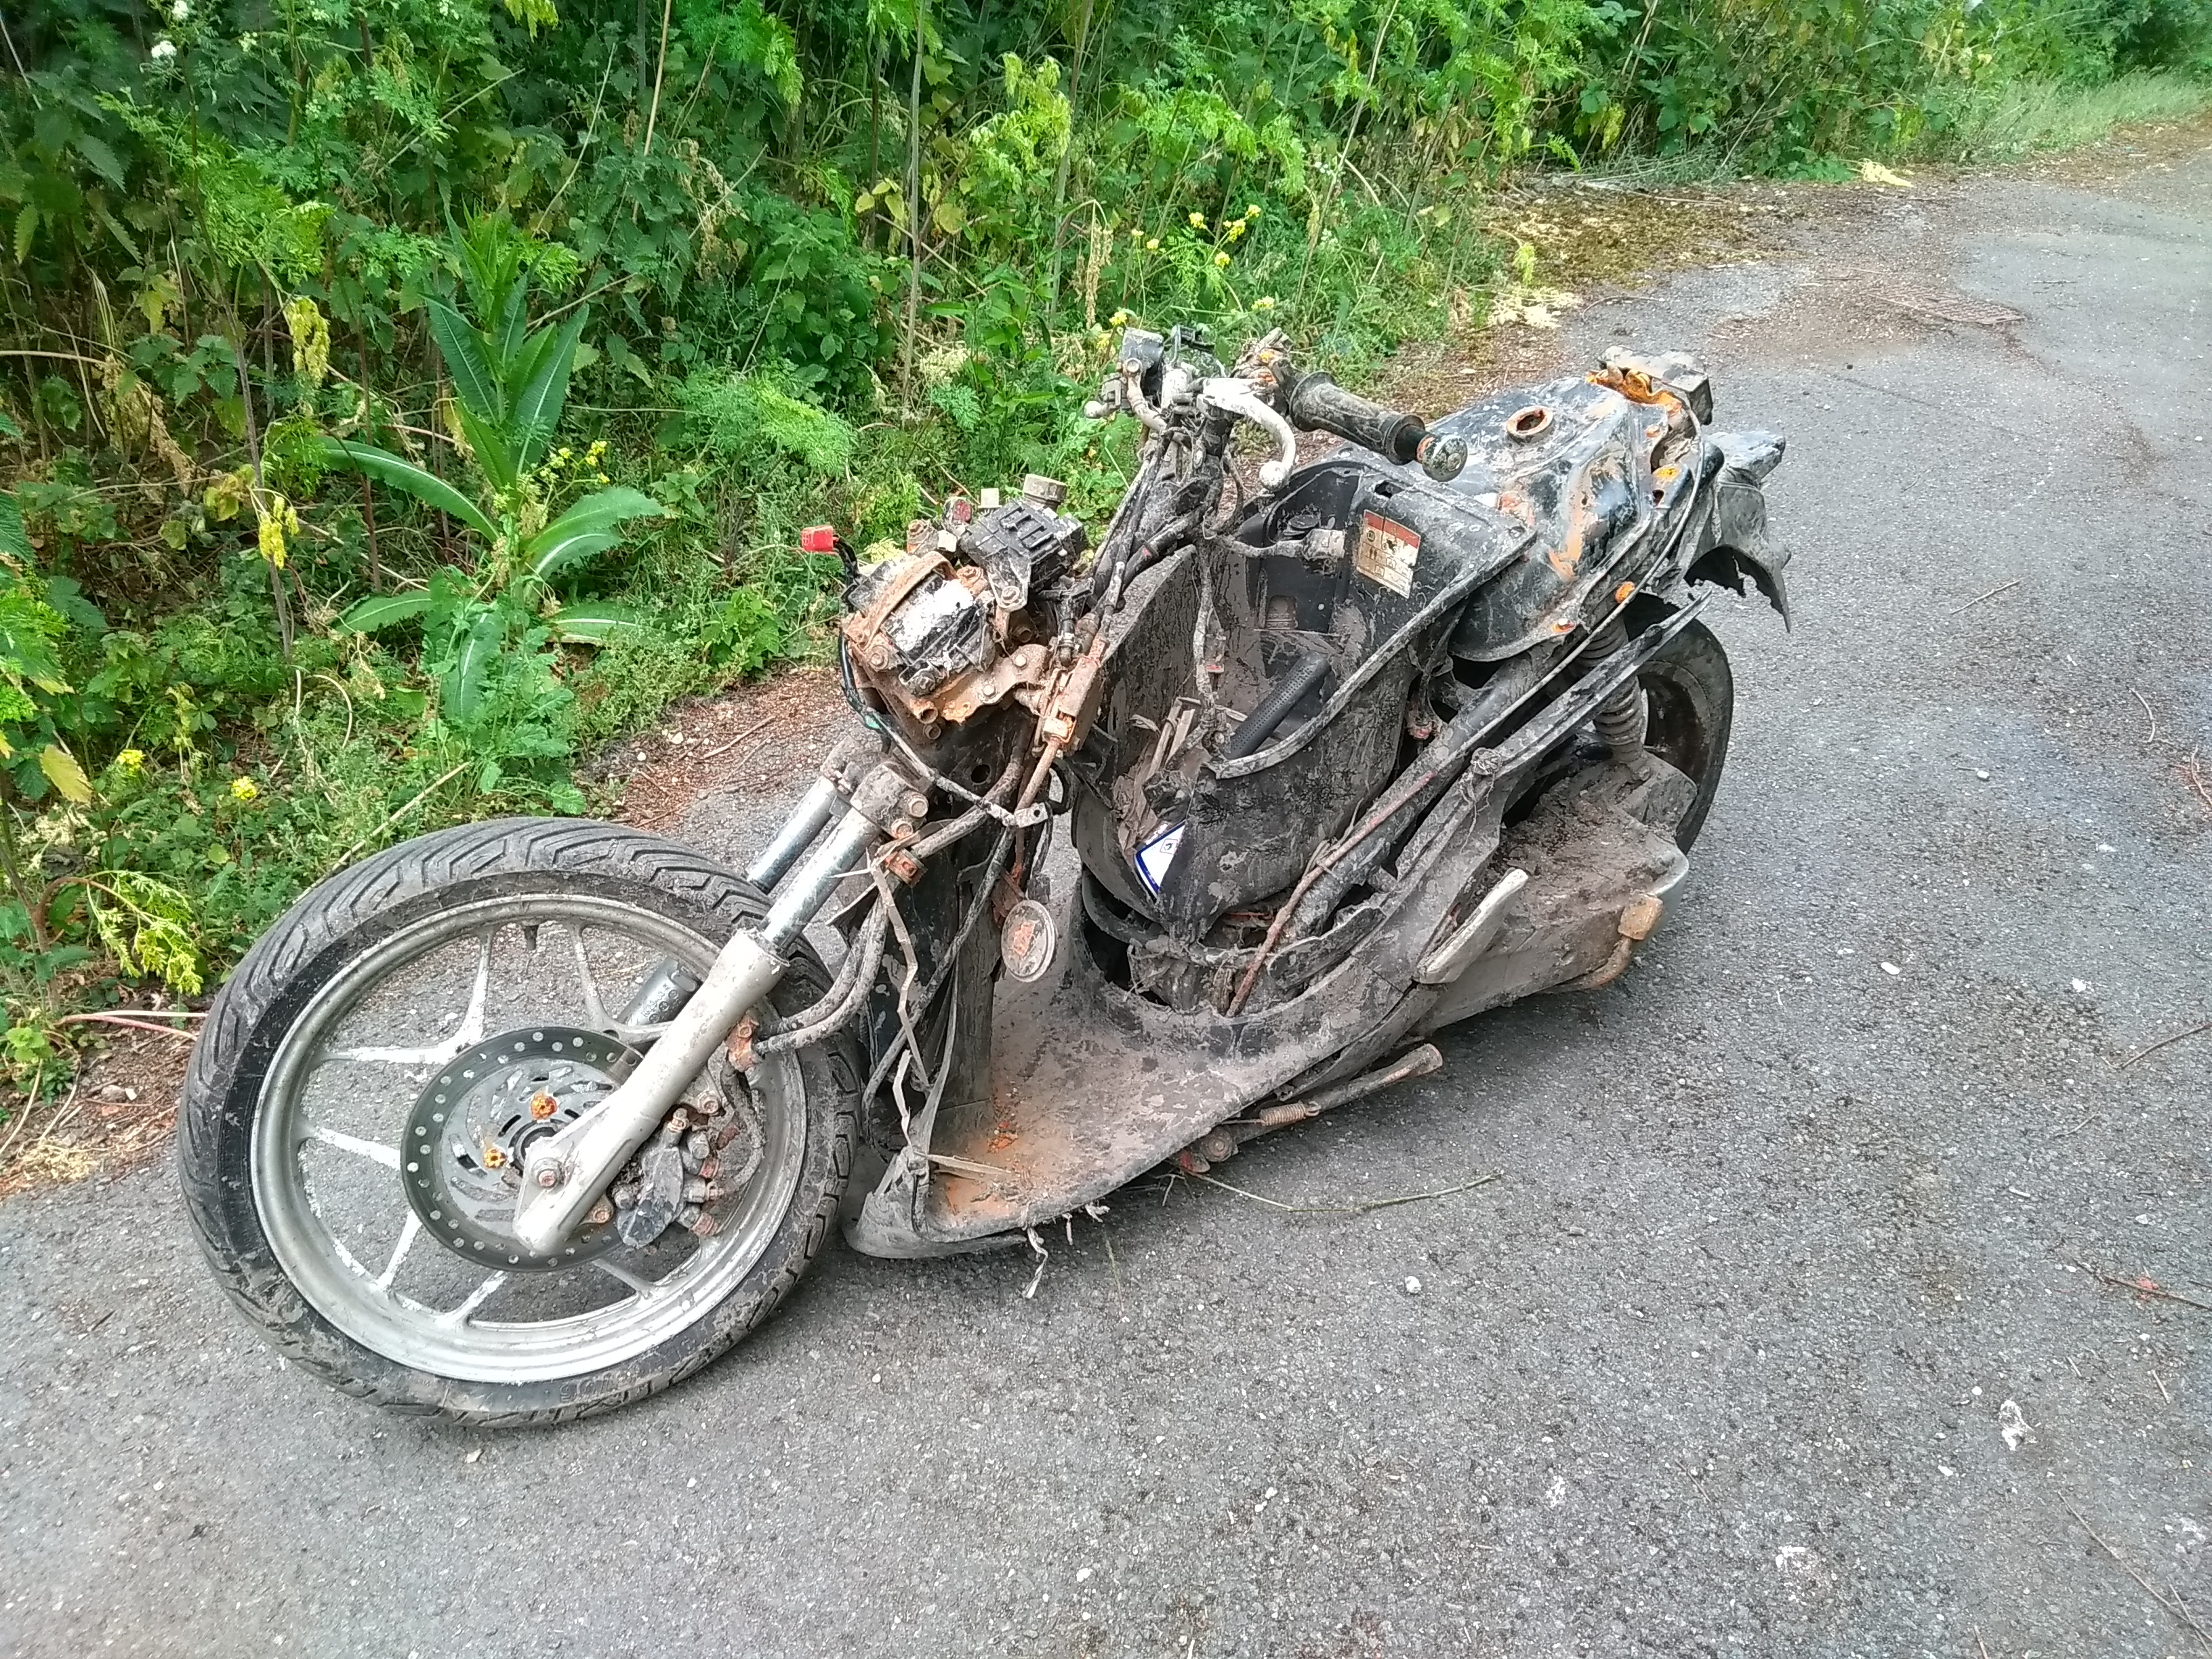 River find | LBT Motorcycle Recovery | London 020 7228 0800